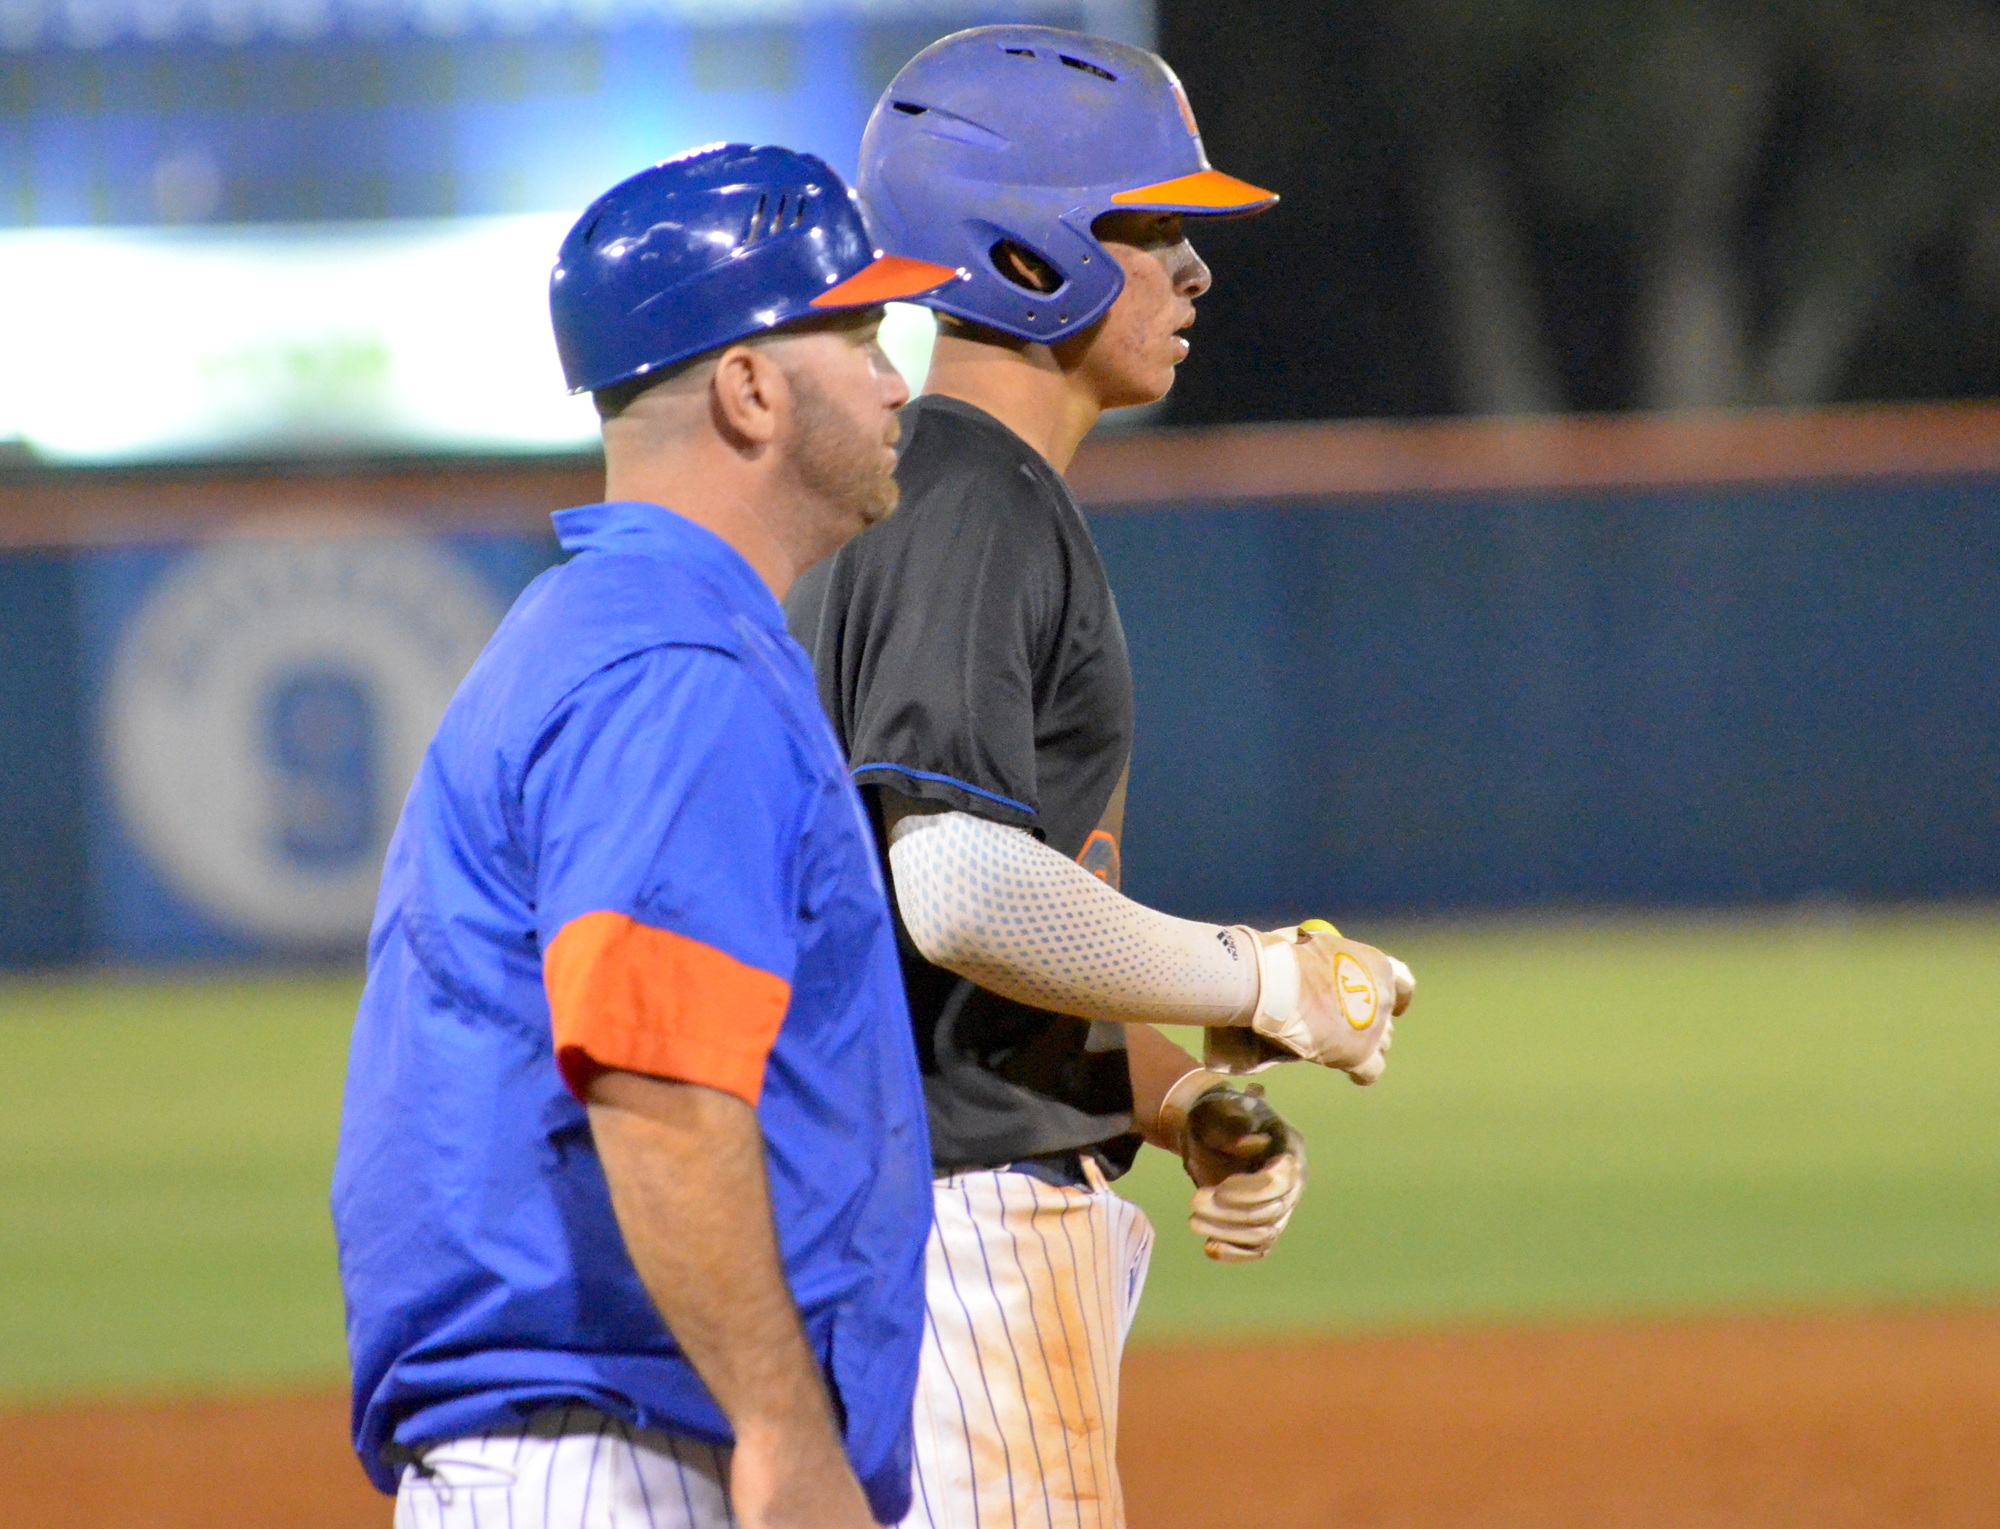 Chris Seise went 3-for-4 and had a pair of triples for West Orange against Lake Brantley.